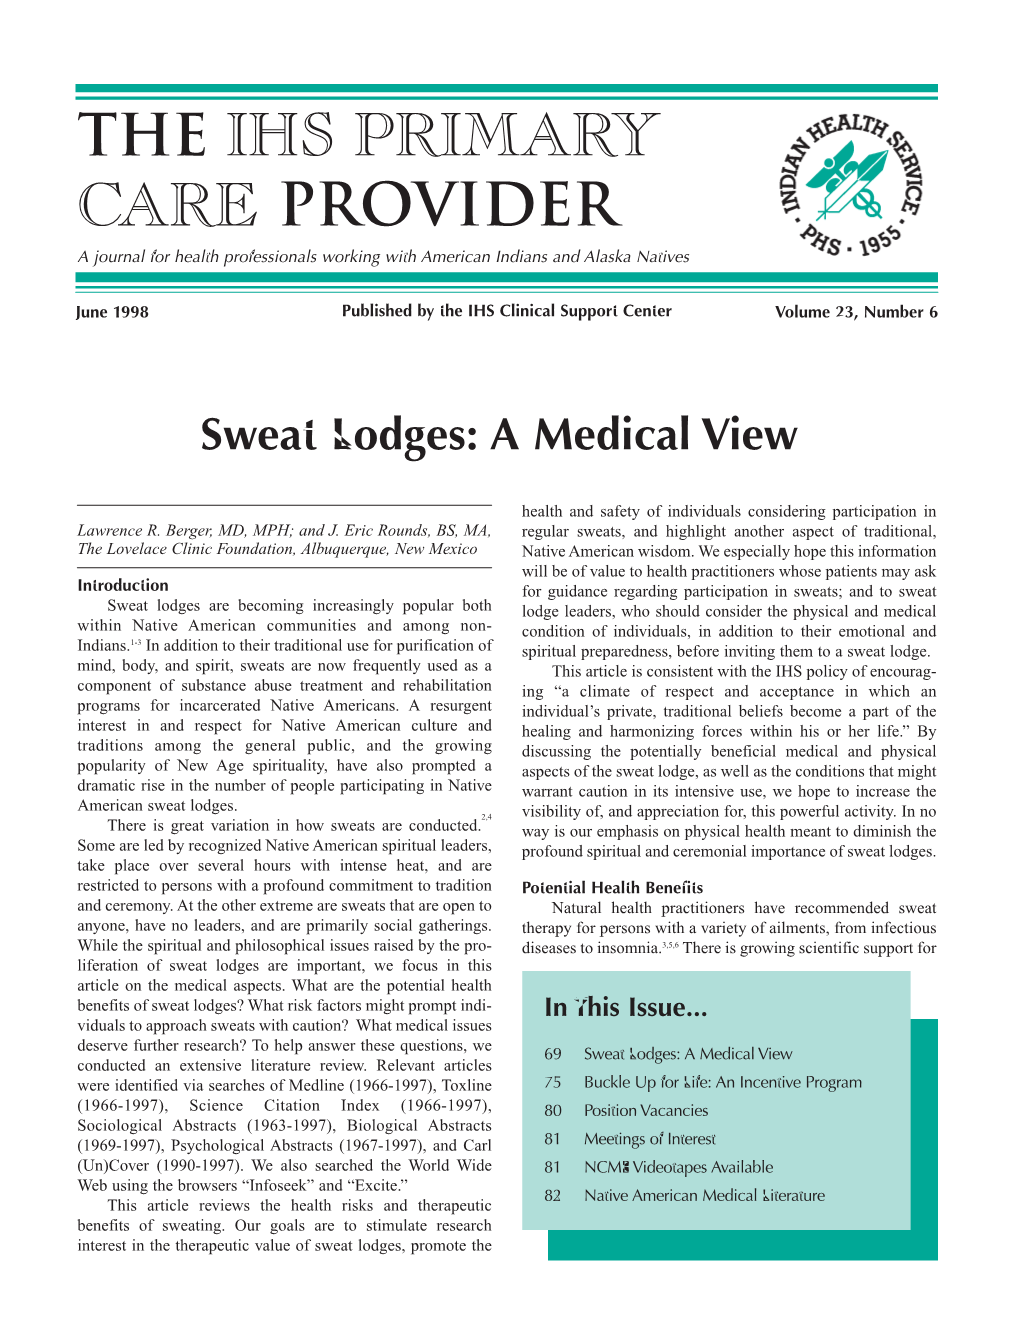 The IHS Primary Care Provider- June 1998 Issue